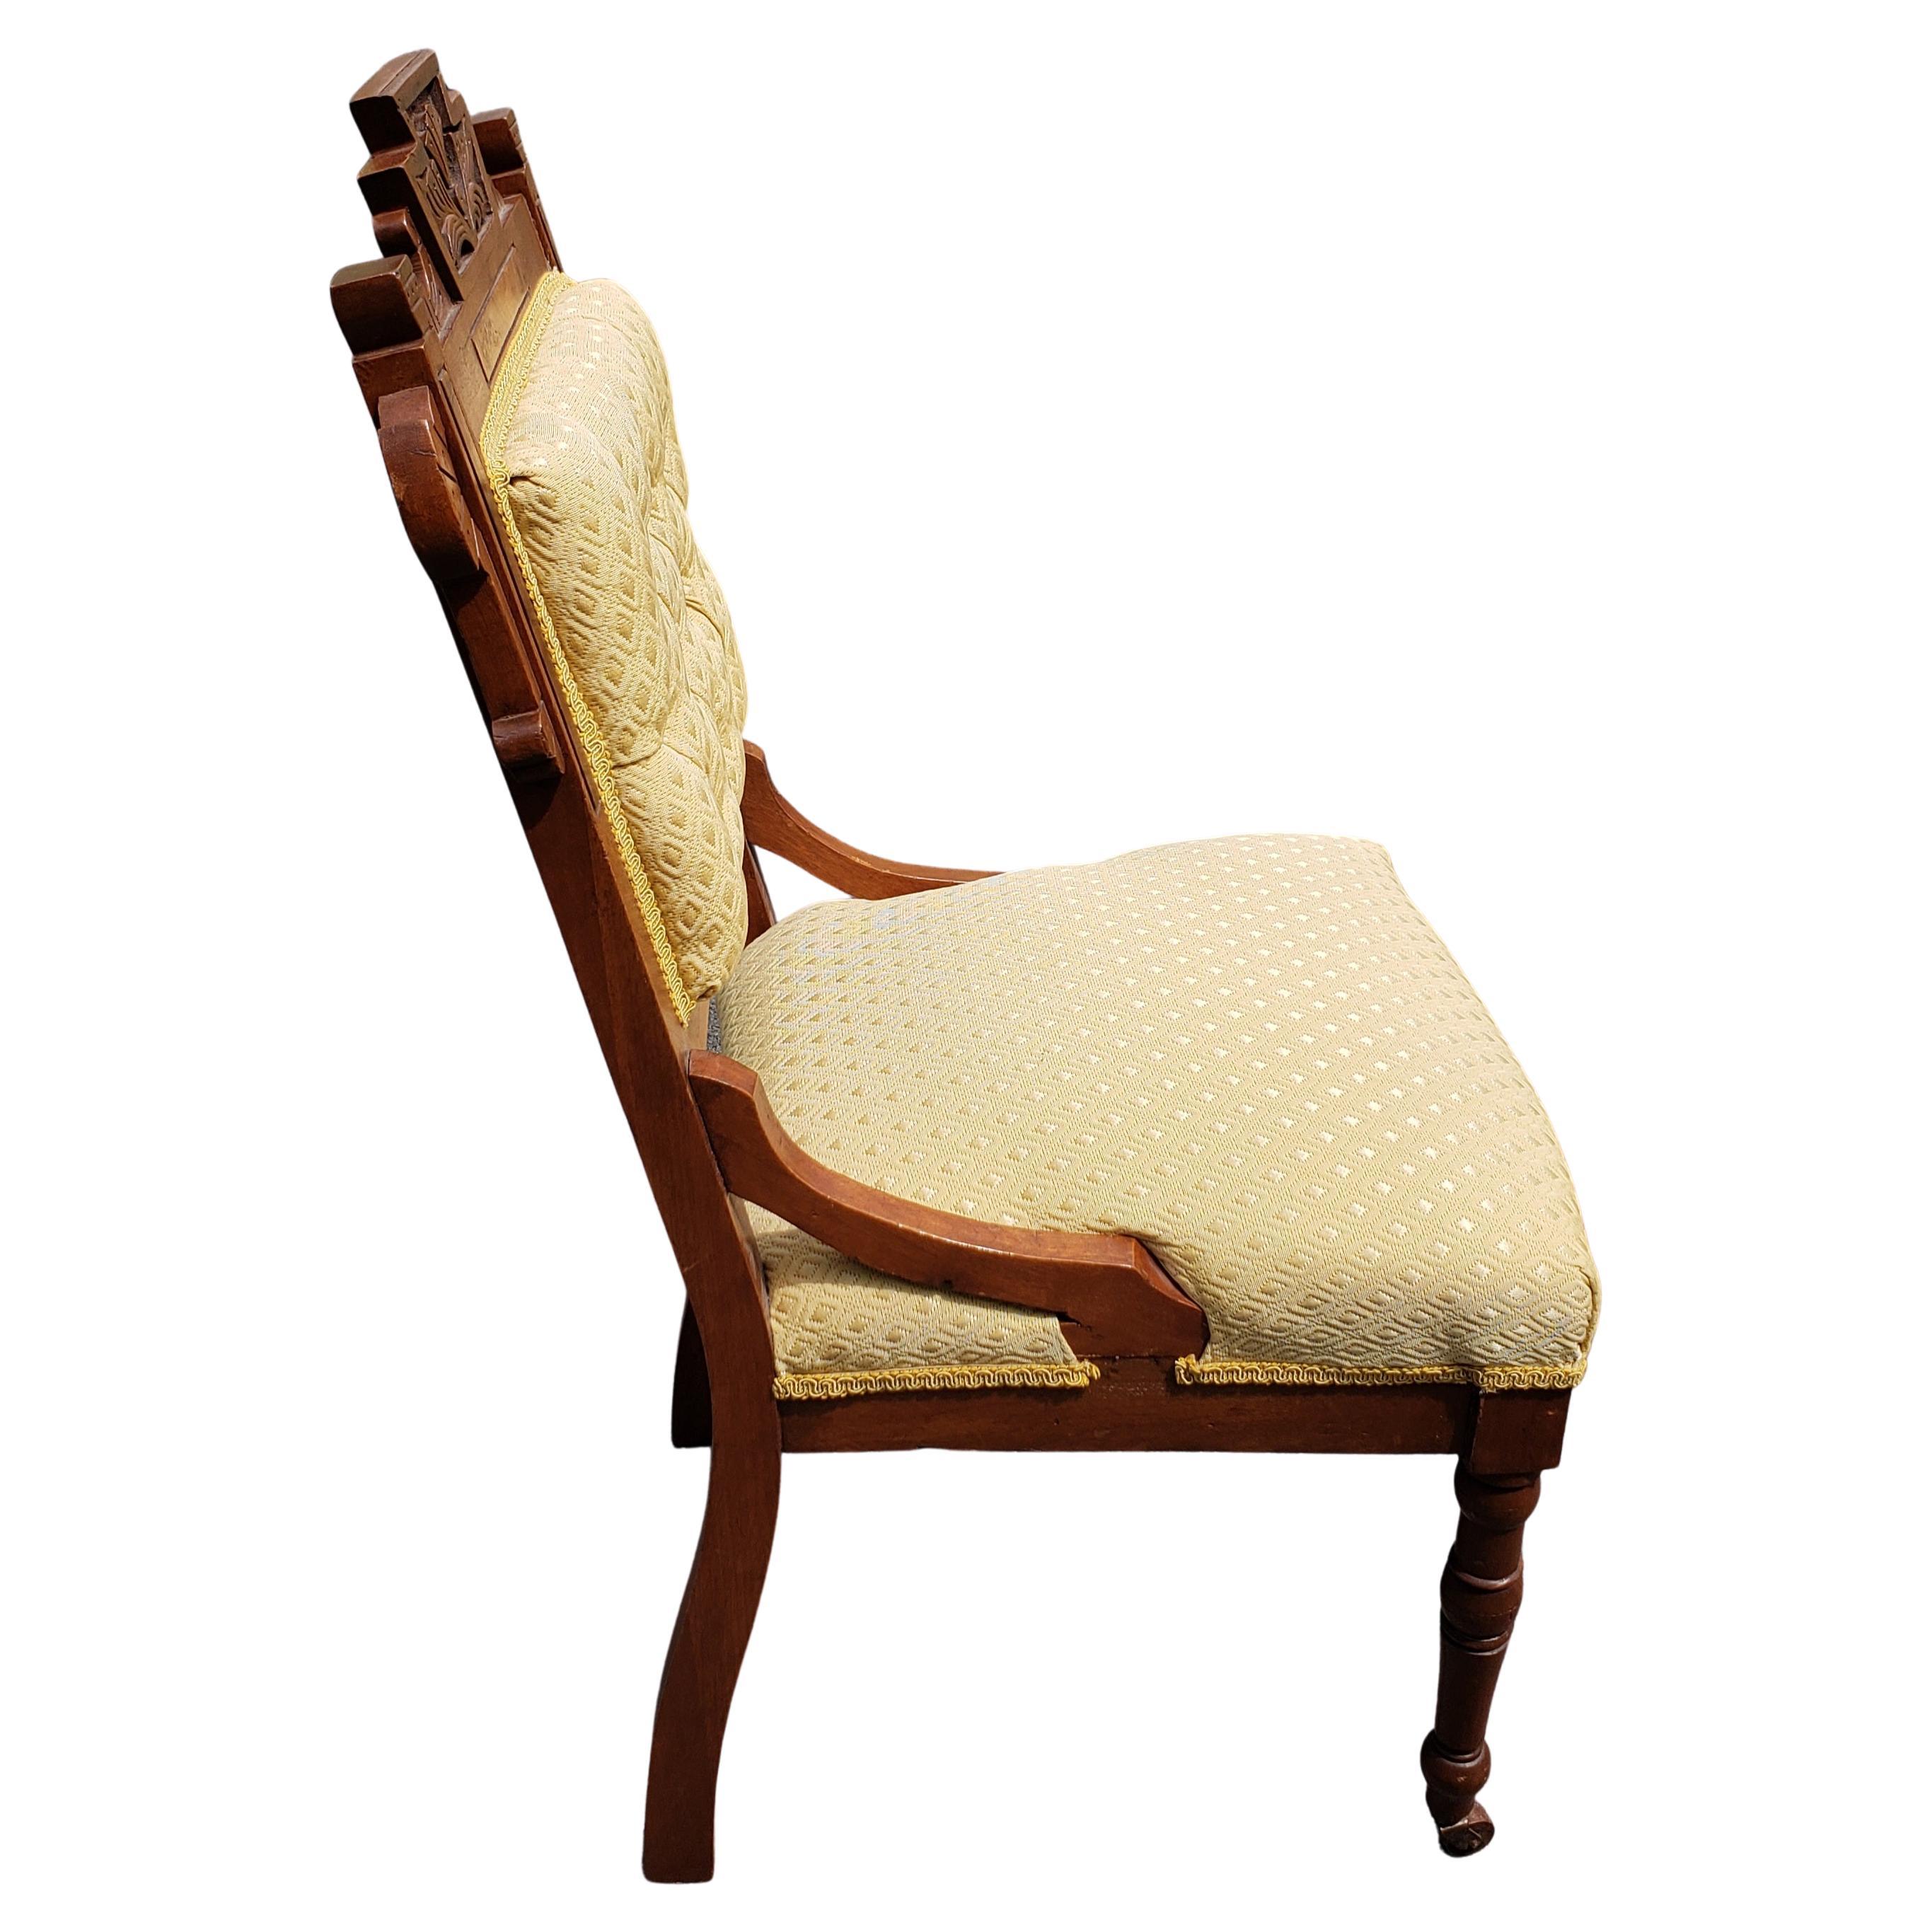 Hand-Carved Antique Victorian Walnut Upholstered Tufted Parlor Chair, Circa 1880s For Sale